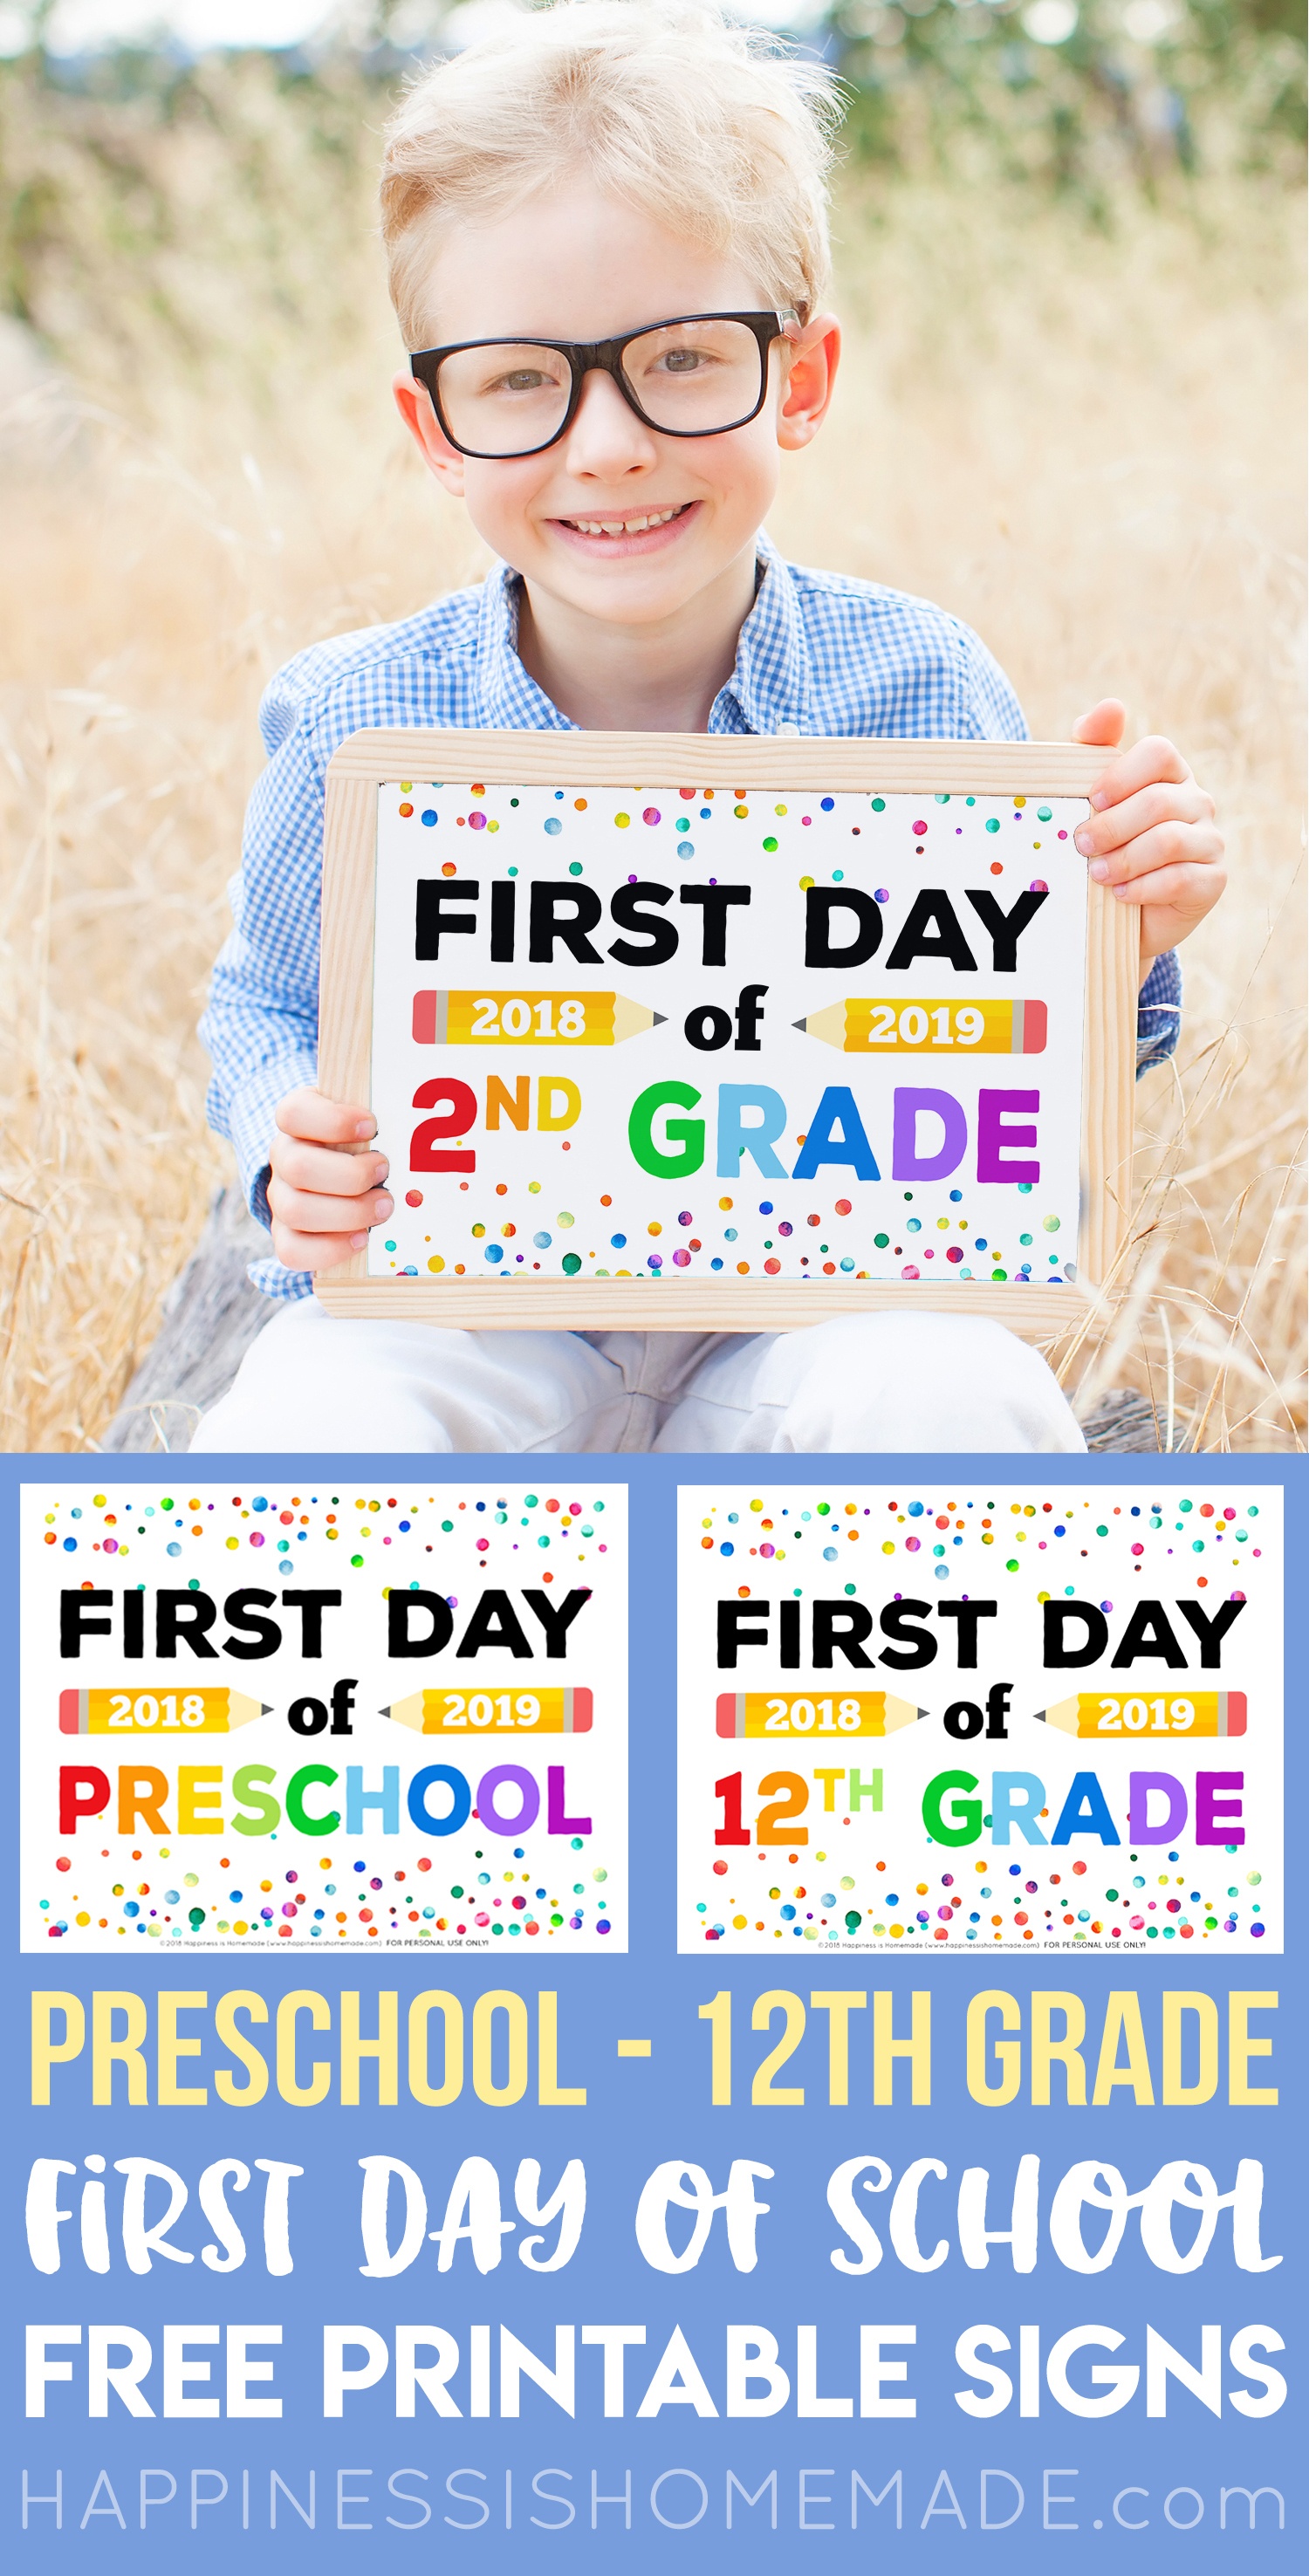 First Day Of School Signs - Free Printables - Happiness Is Homemade - Free First Day Of School Printables 2018